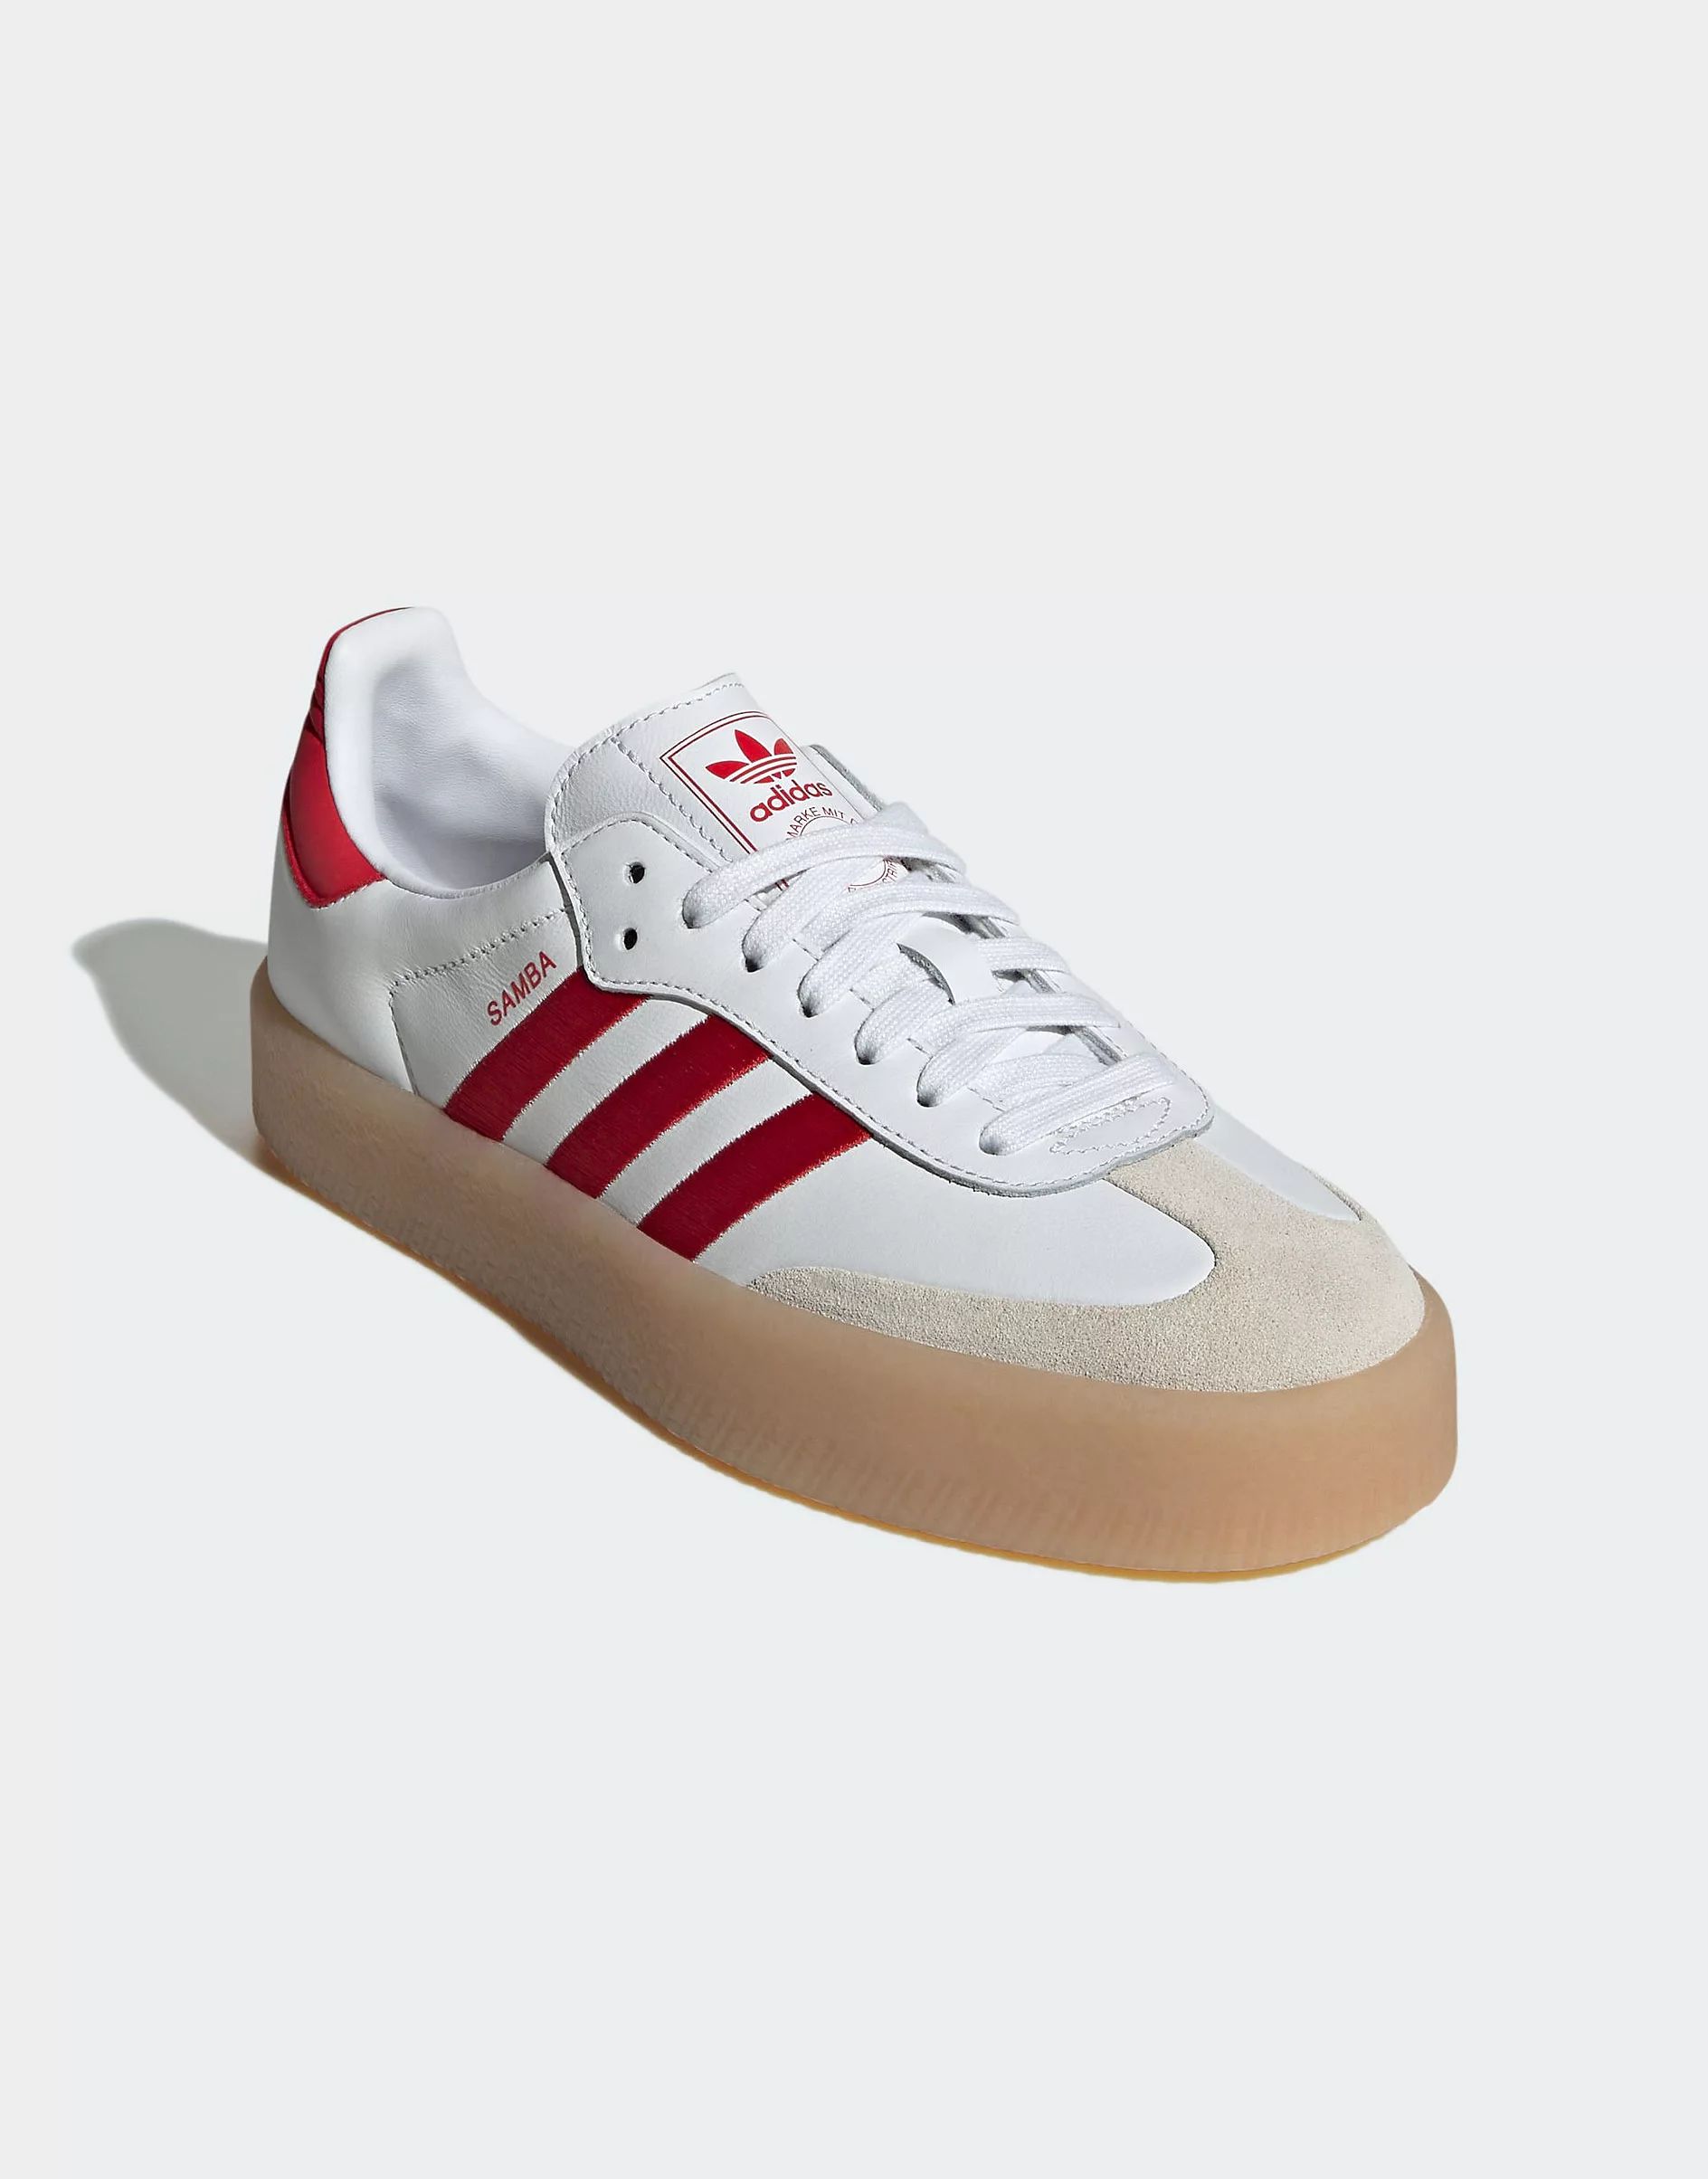 adidas Originals Samba sneakers with gum sole in white and red | ASOS | ASOS (Global)